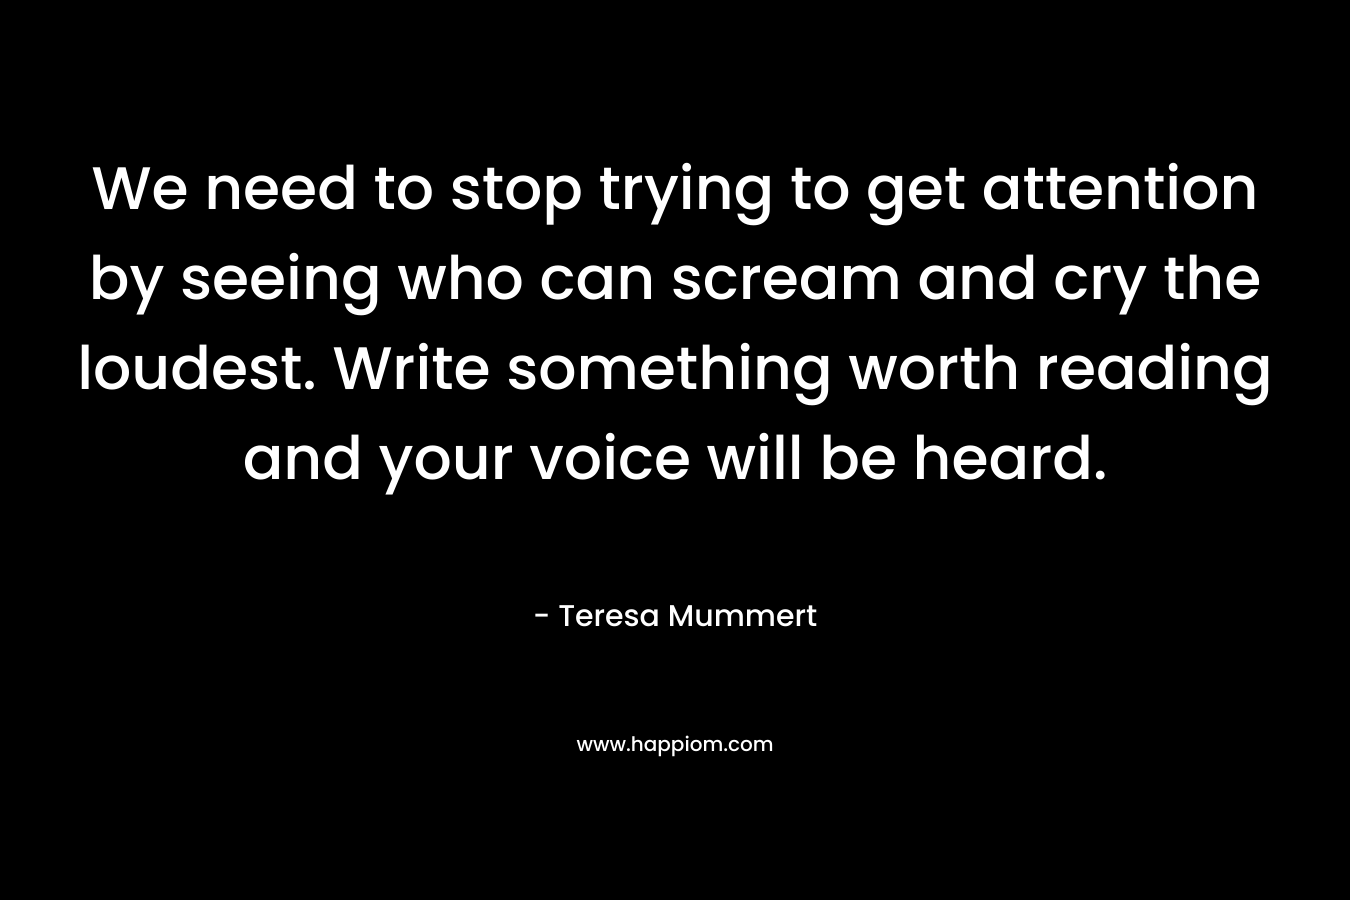 We need to stop trying to get attention by seeing who can scream and cry the loudest. Write something worth reading and your voice will be heard. – Teresa Mummert